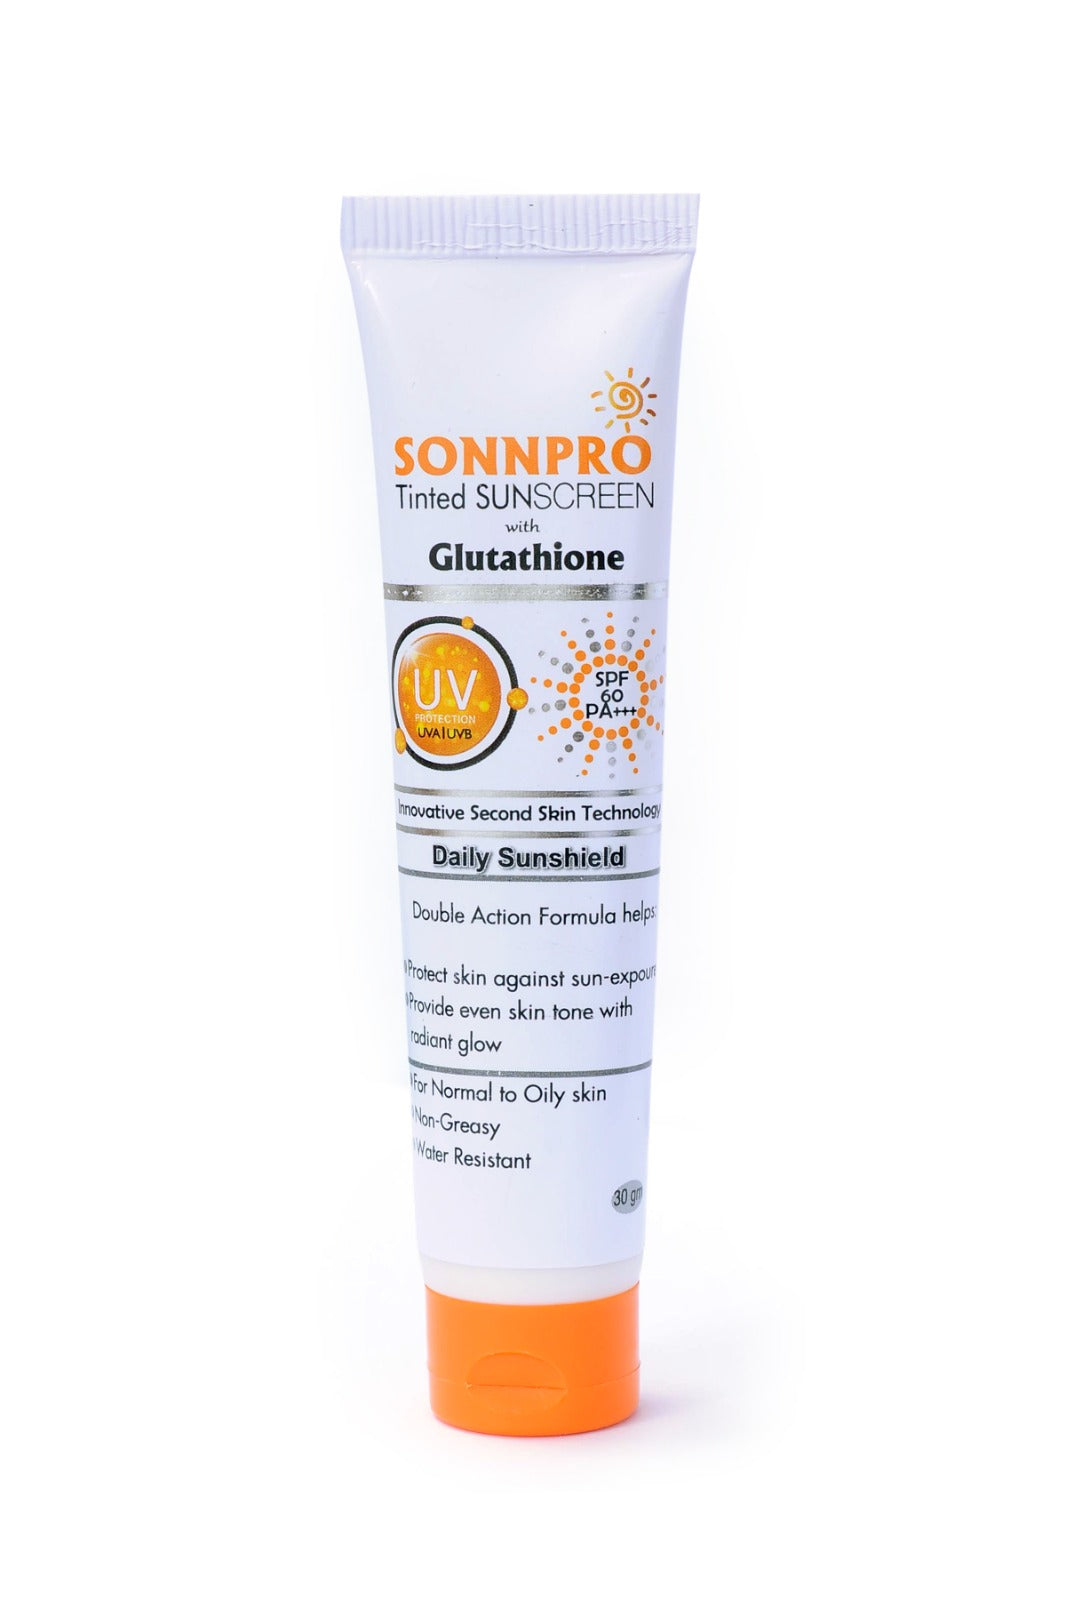 SONNPRO Tinted Sunscreen with Glutathione 30gms